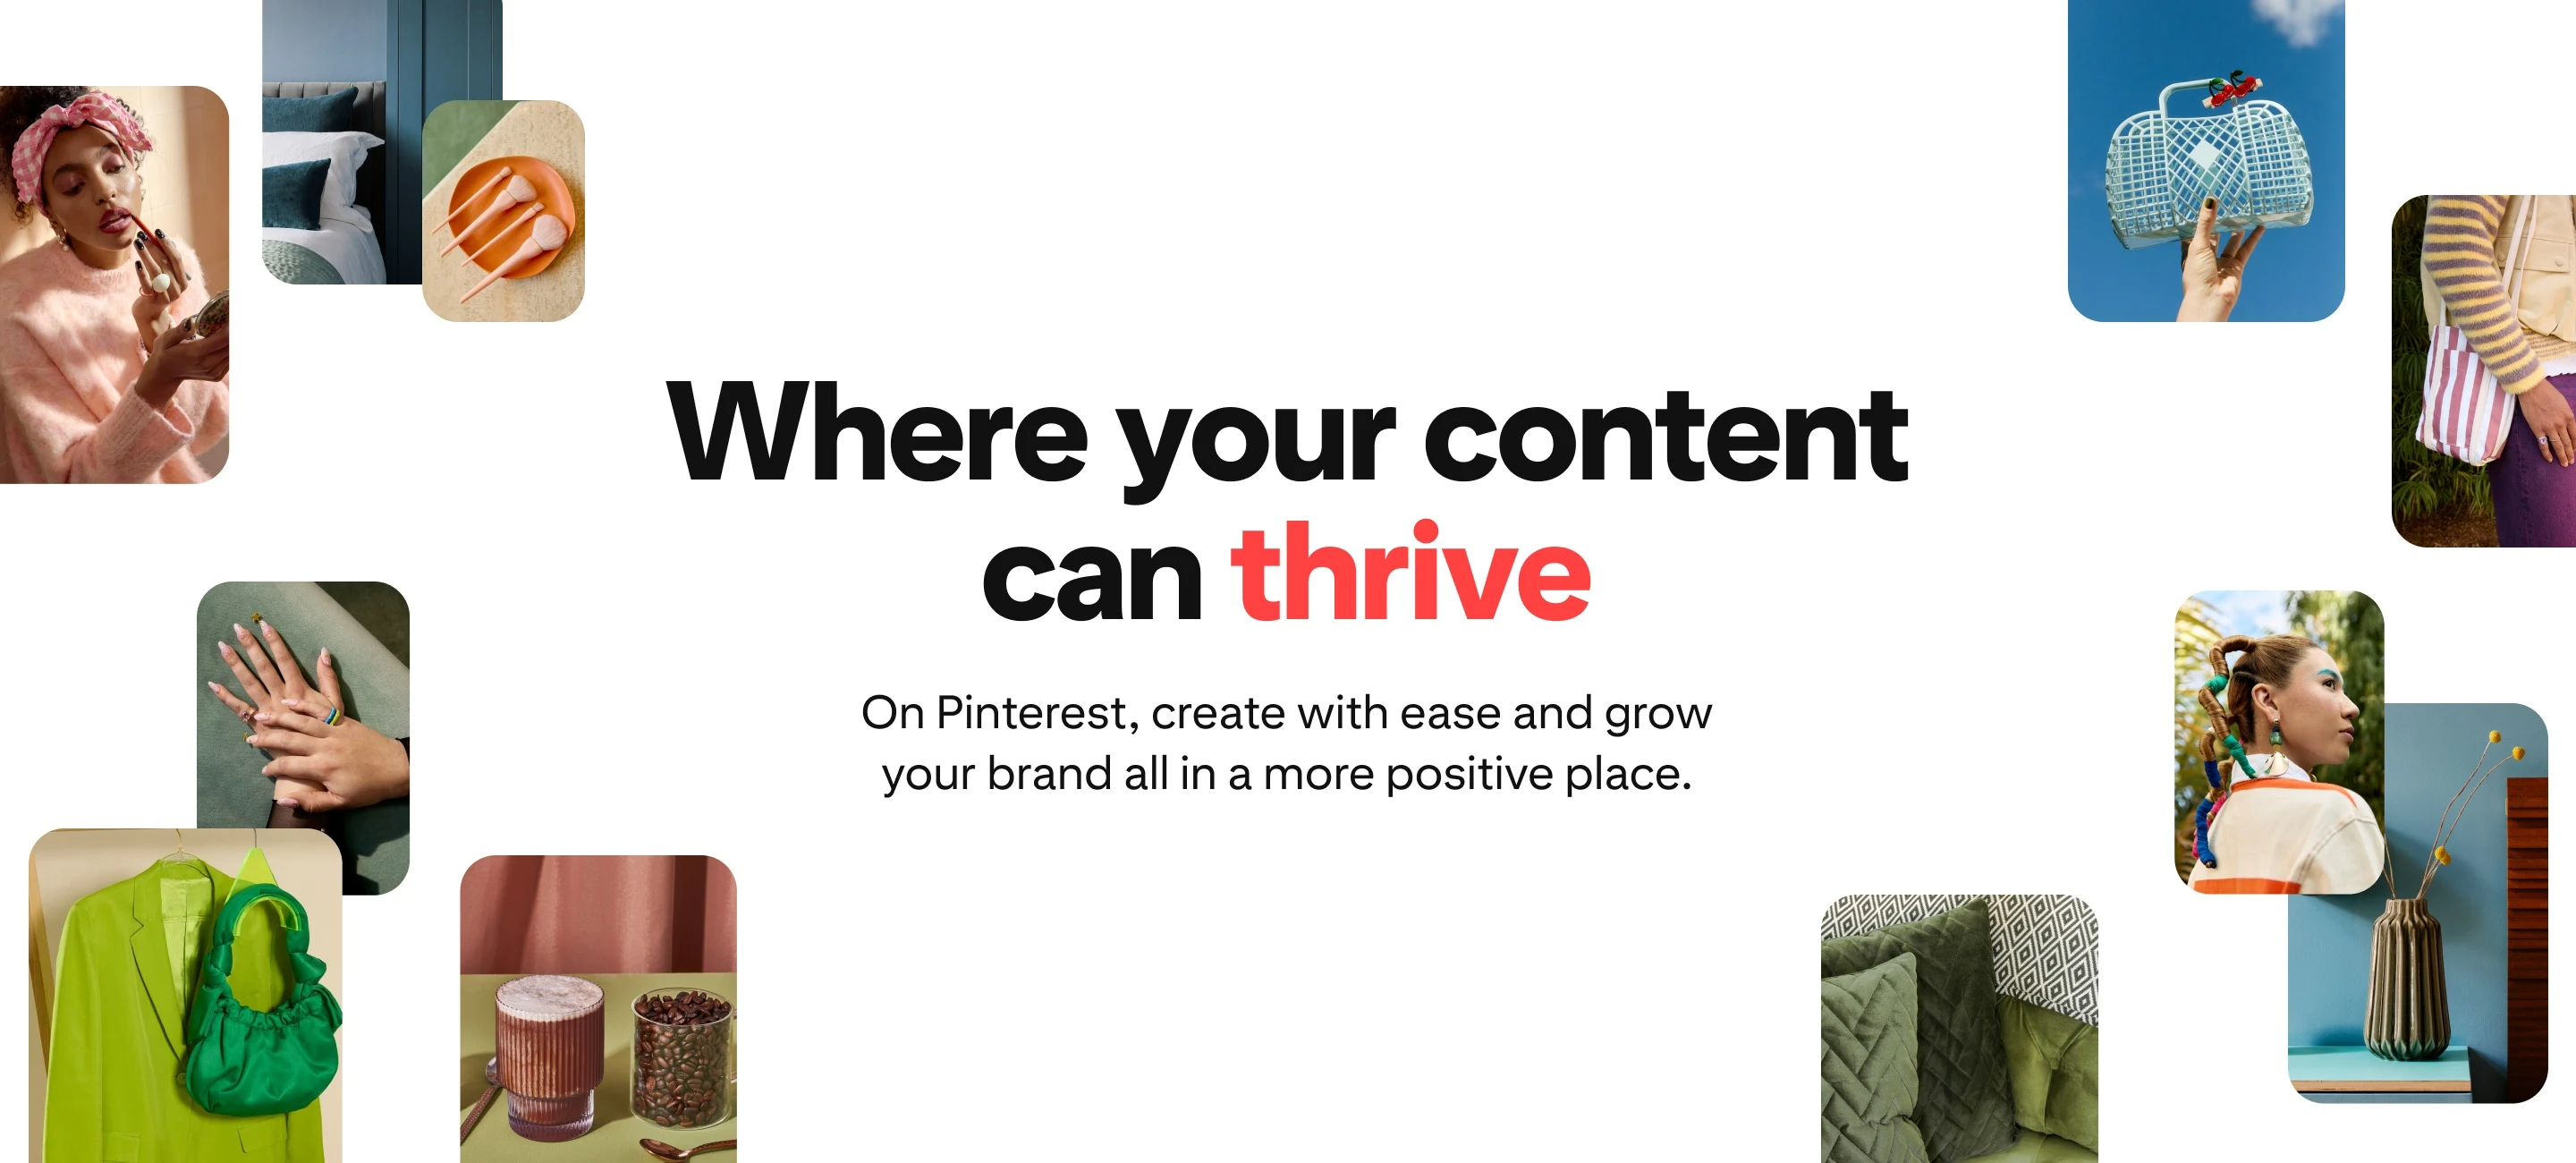 Collage images on a white background with headline text saying ‘Where your content can thrive’ and sub copy saying ‘On Pinterest, create with ease and grow your brand, all in a more positive place.’